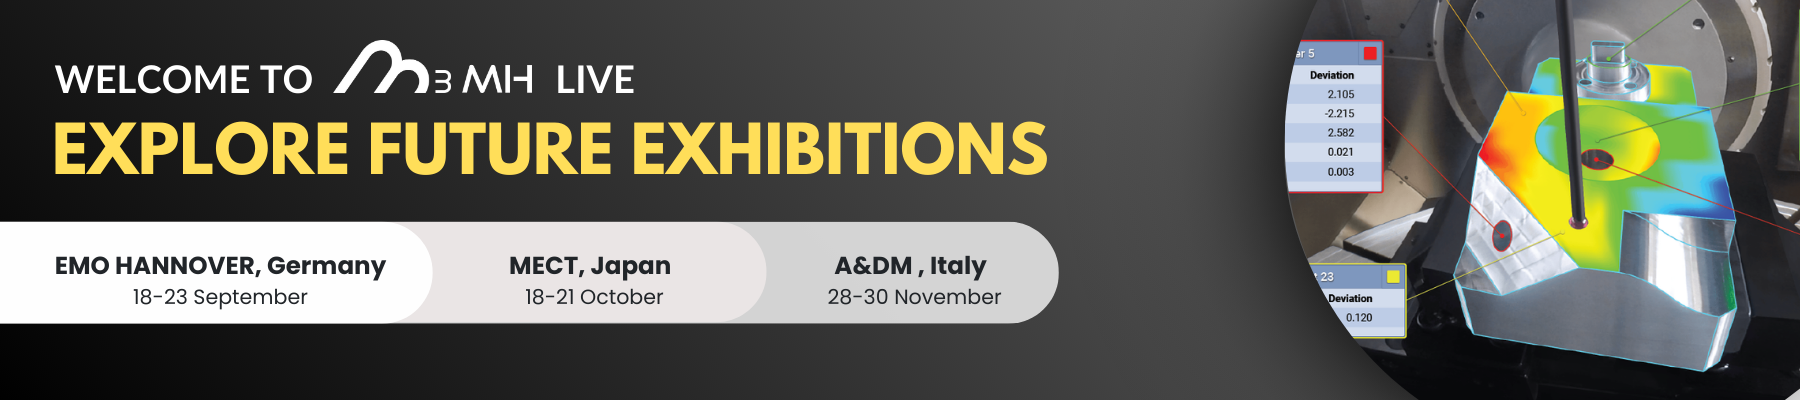 See M3MH Software in Action at Top Exhibitions!